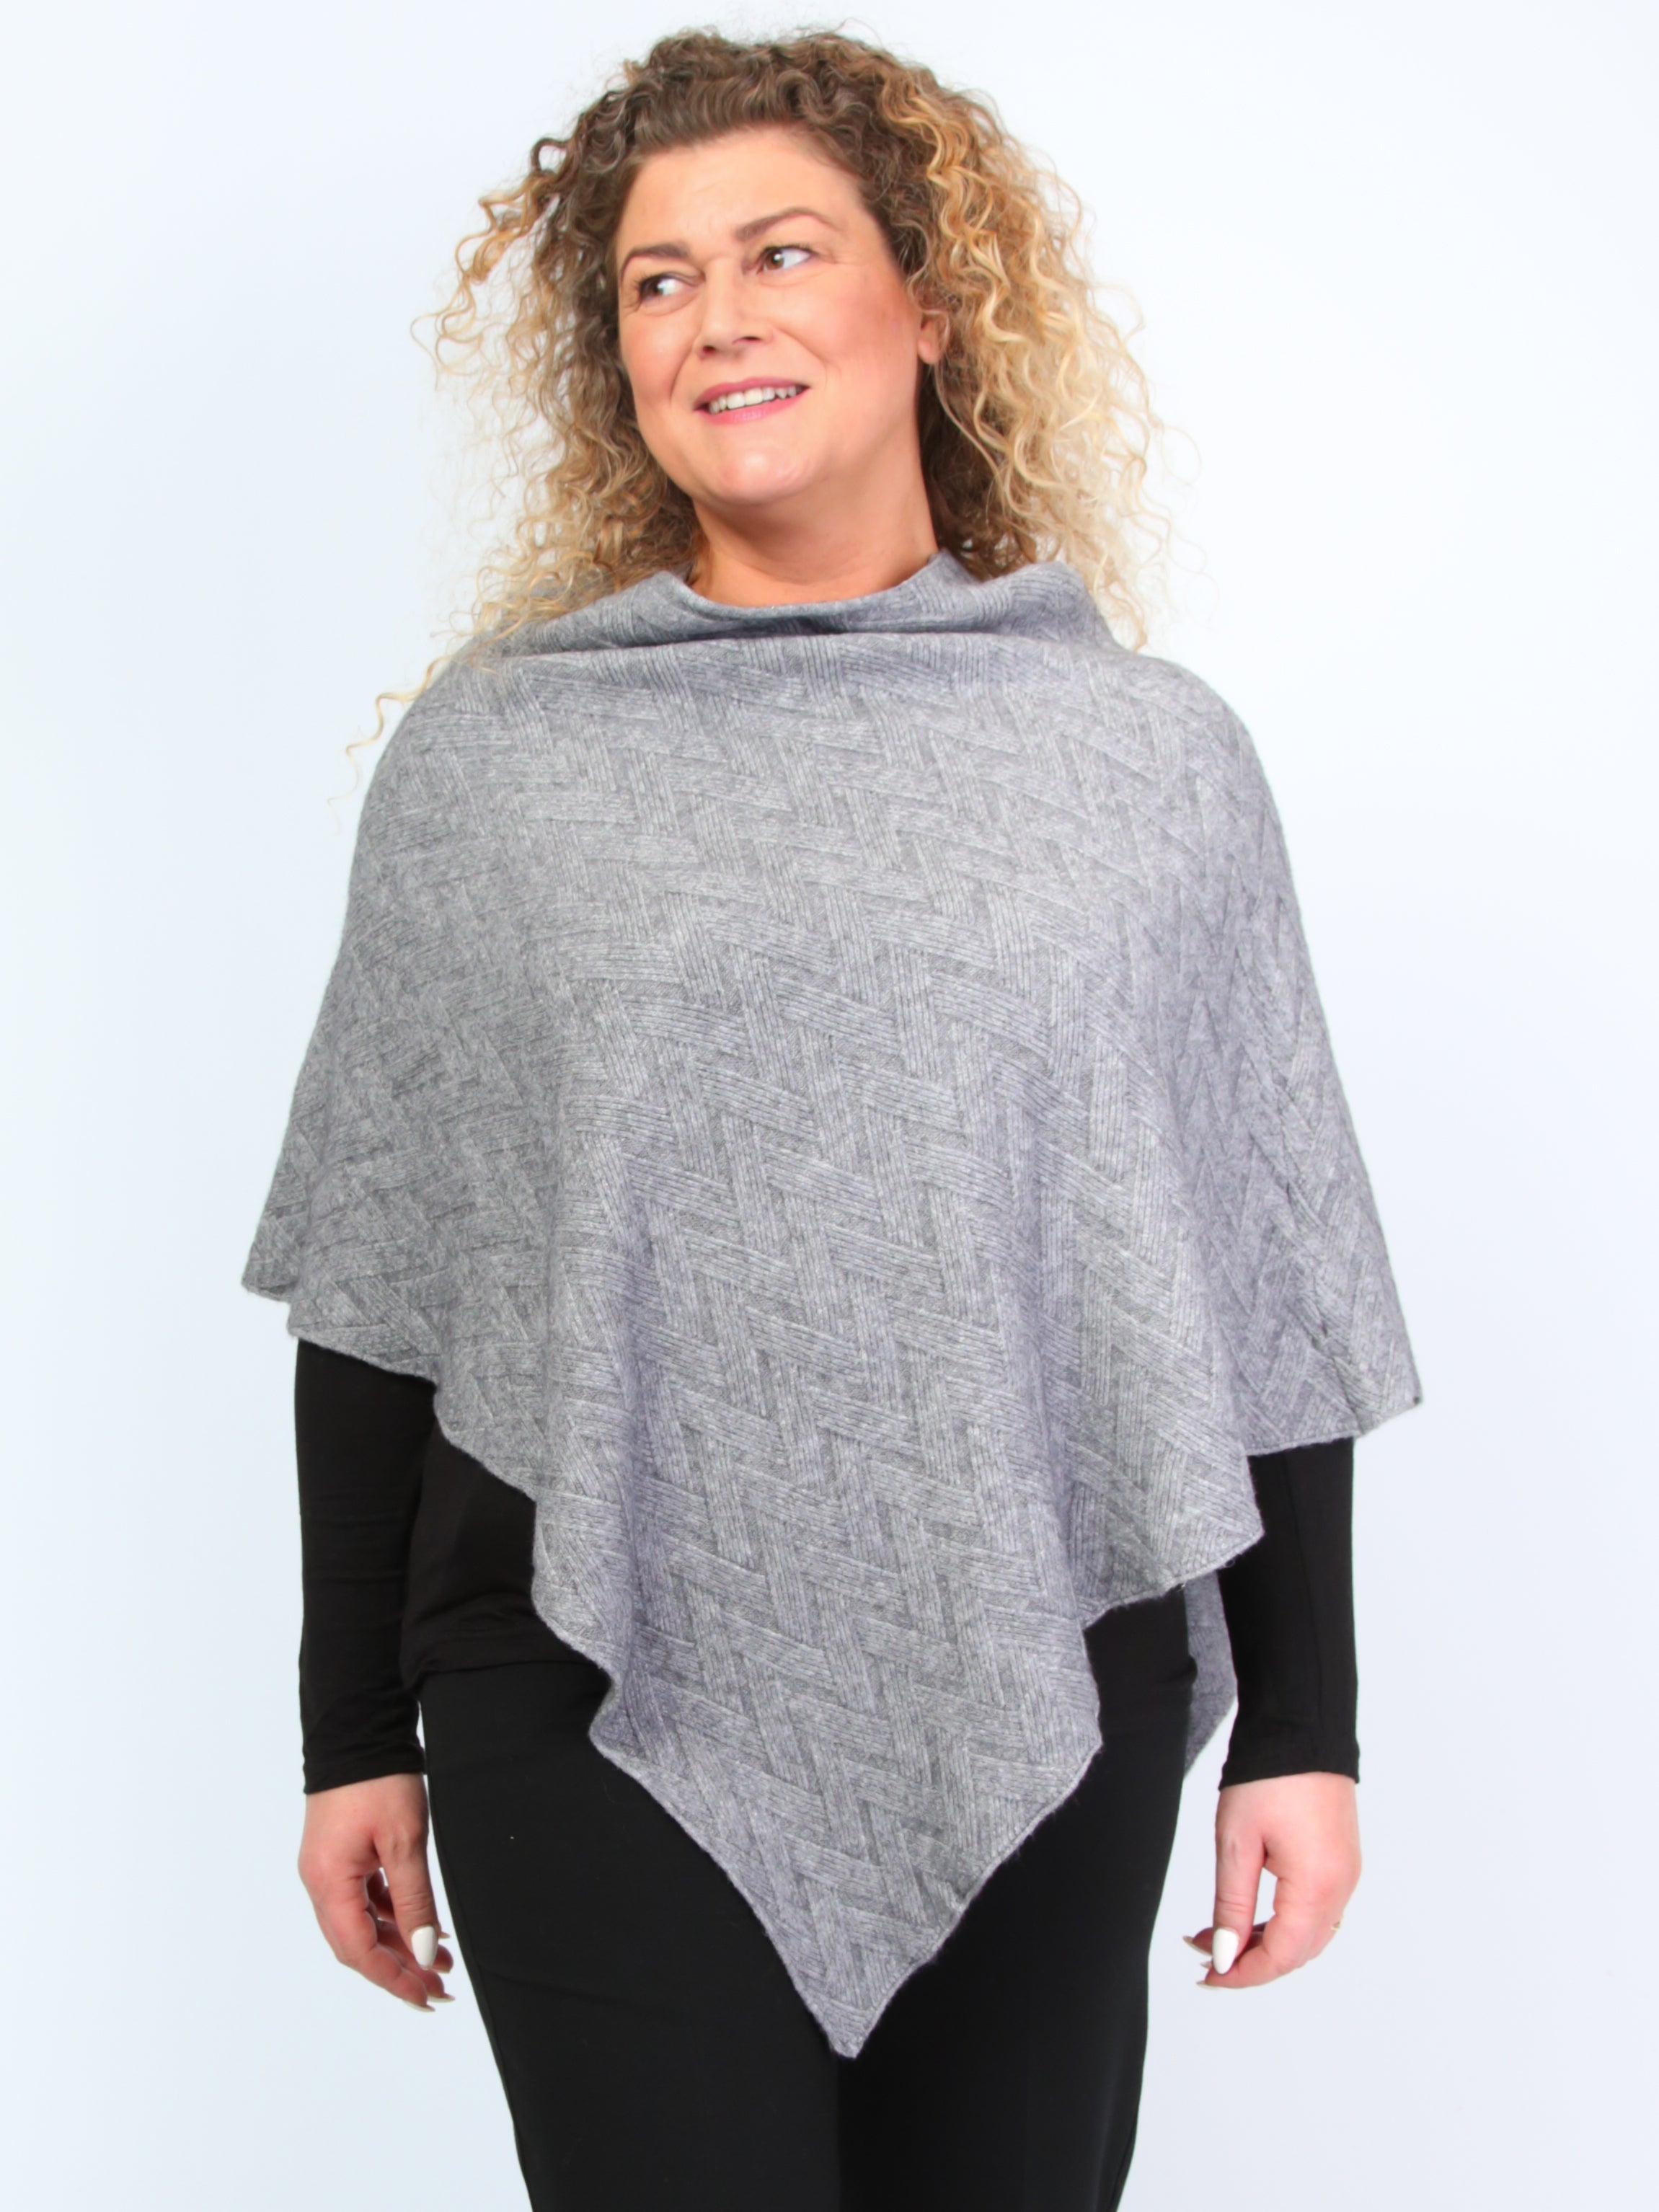 Krone 1 knitted poncho with zigzag